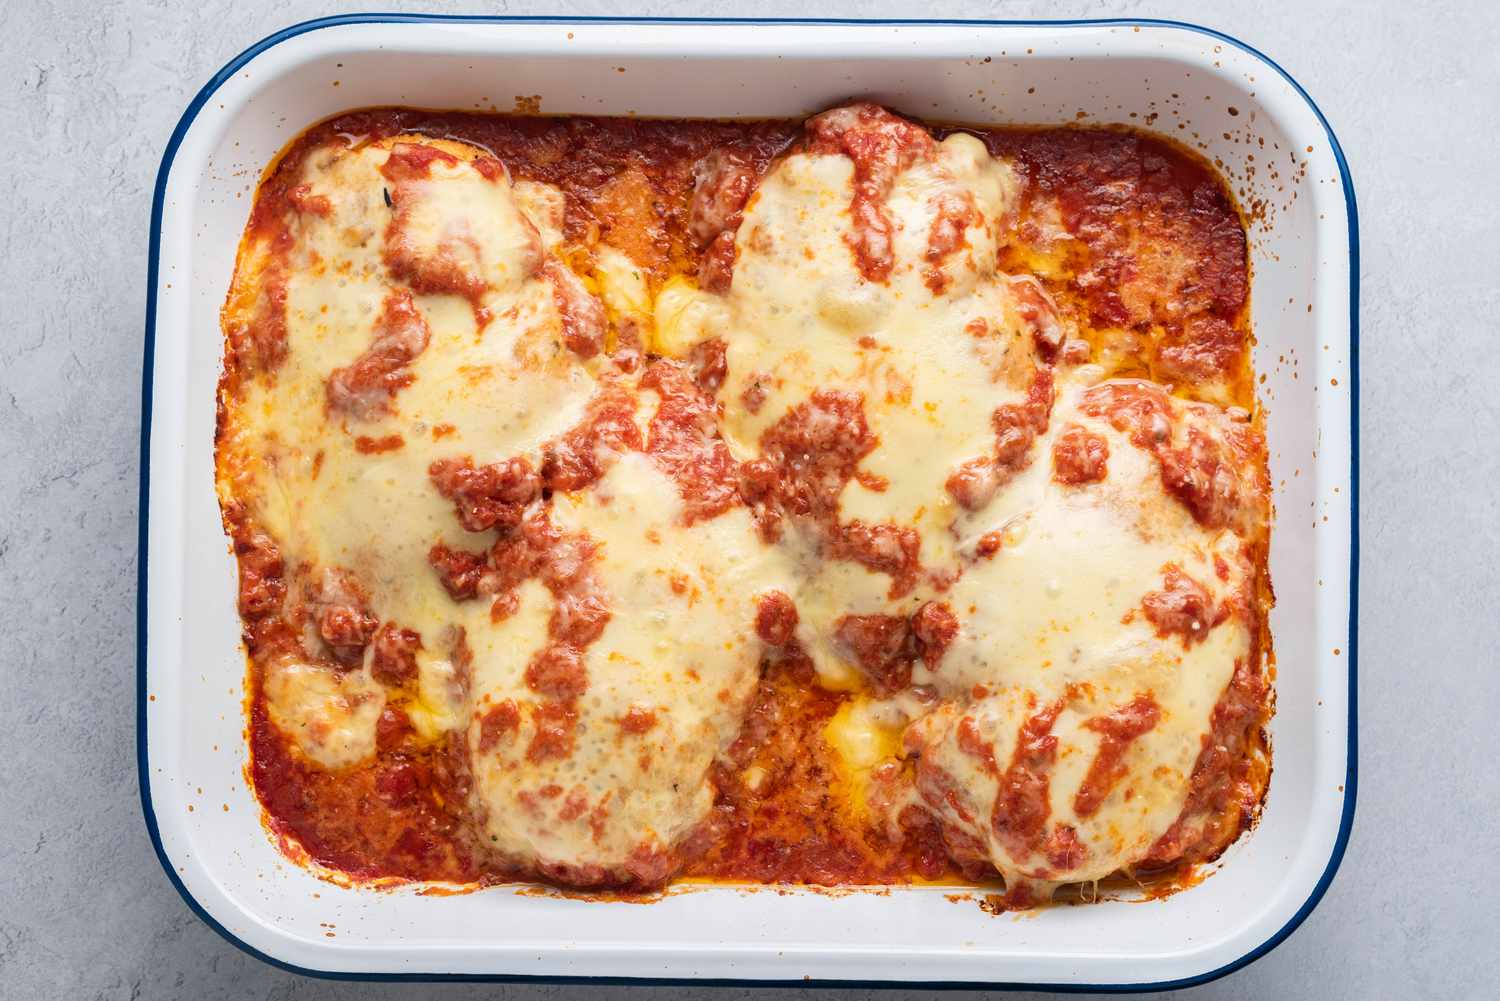 Tomato sauce, chicken and cheese baked in a baking pan